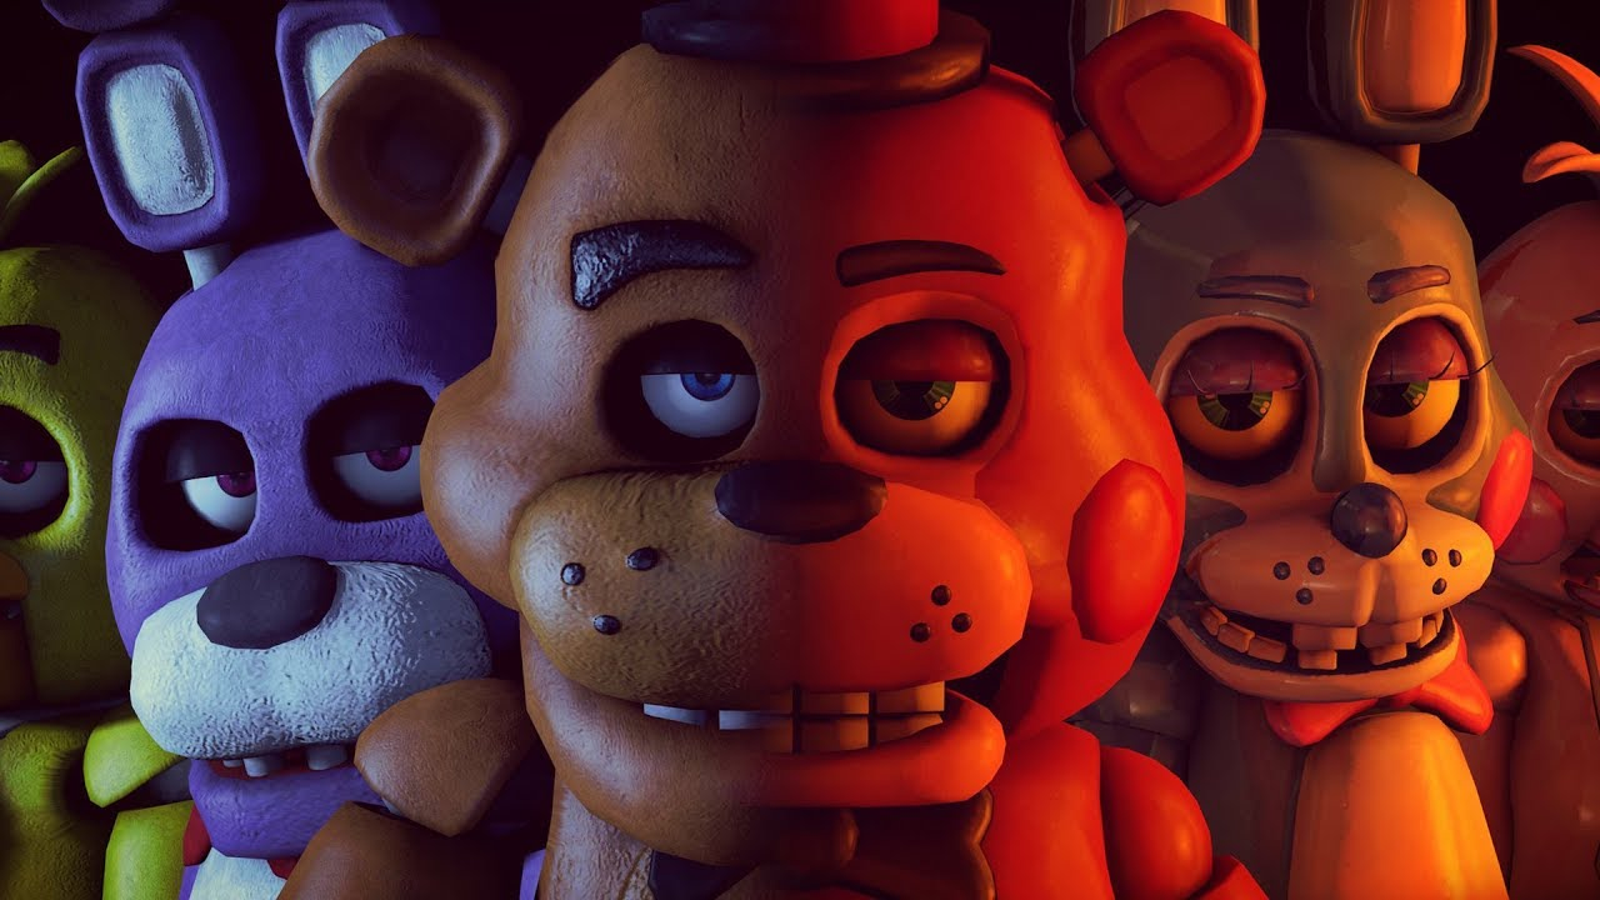 What do you think about the recent gameplay of the FNaF SB? Is it